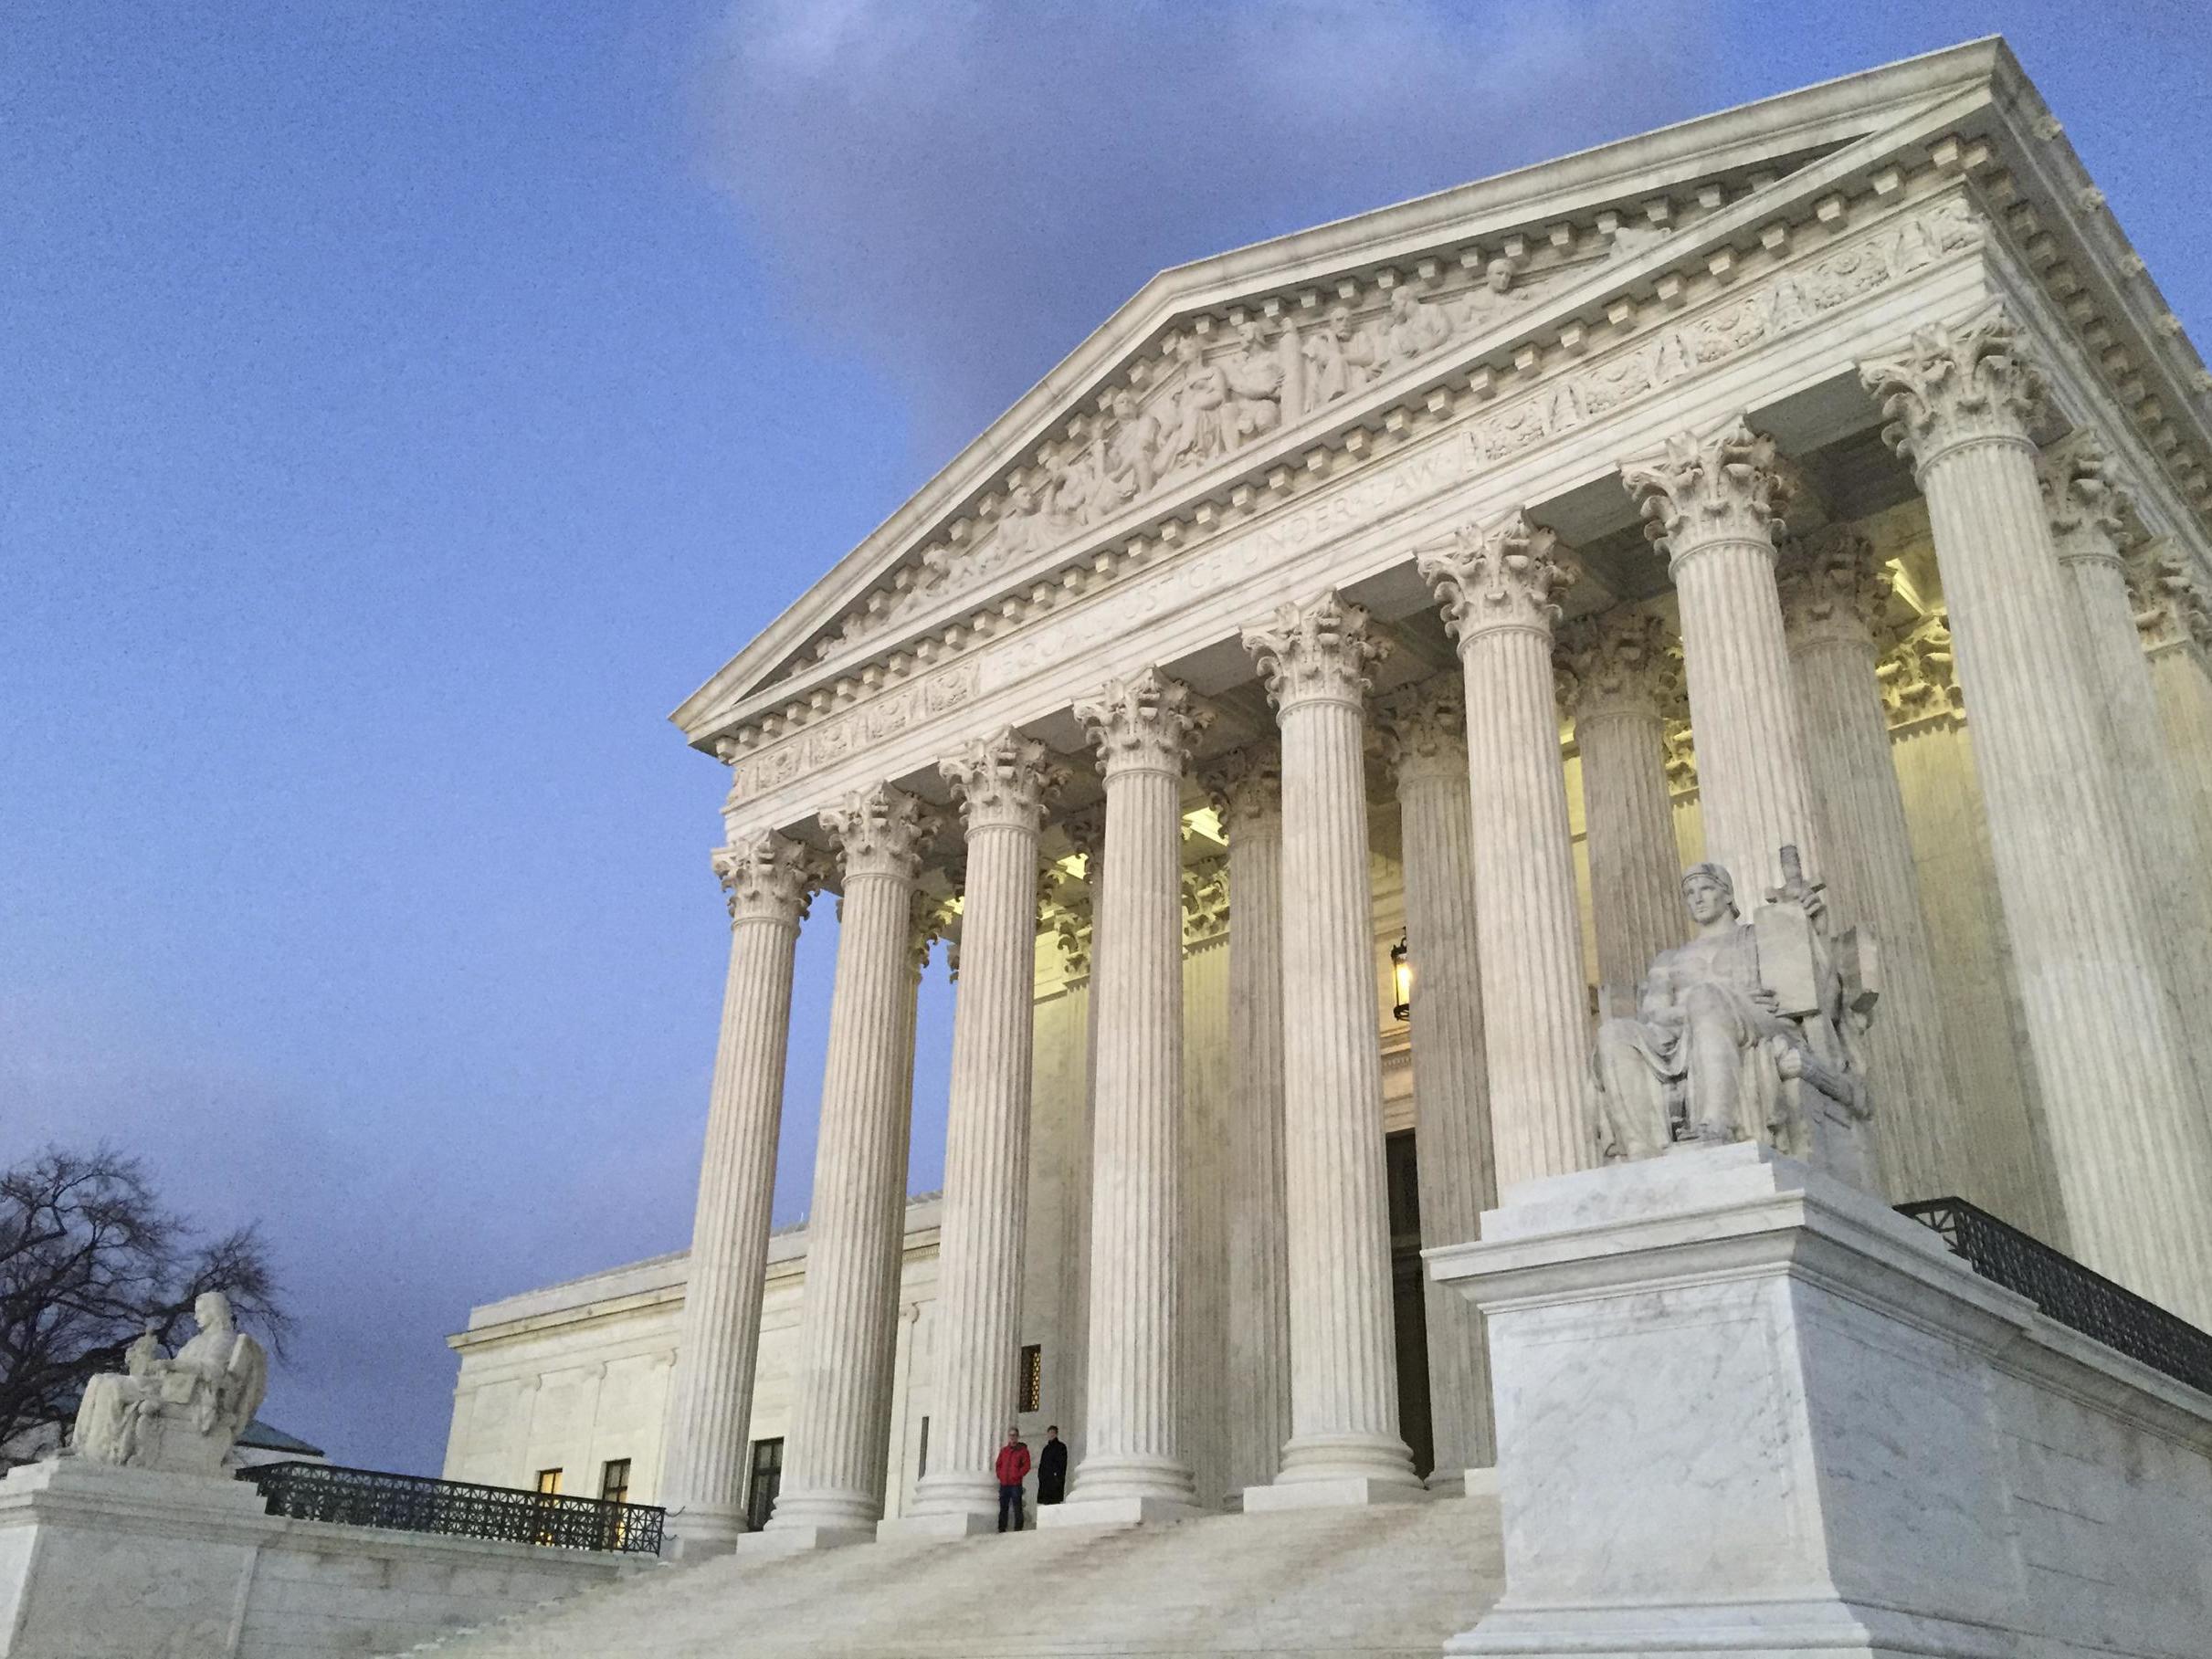 People stand on the steps of the Supreme Court in Washington